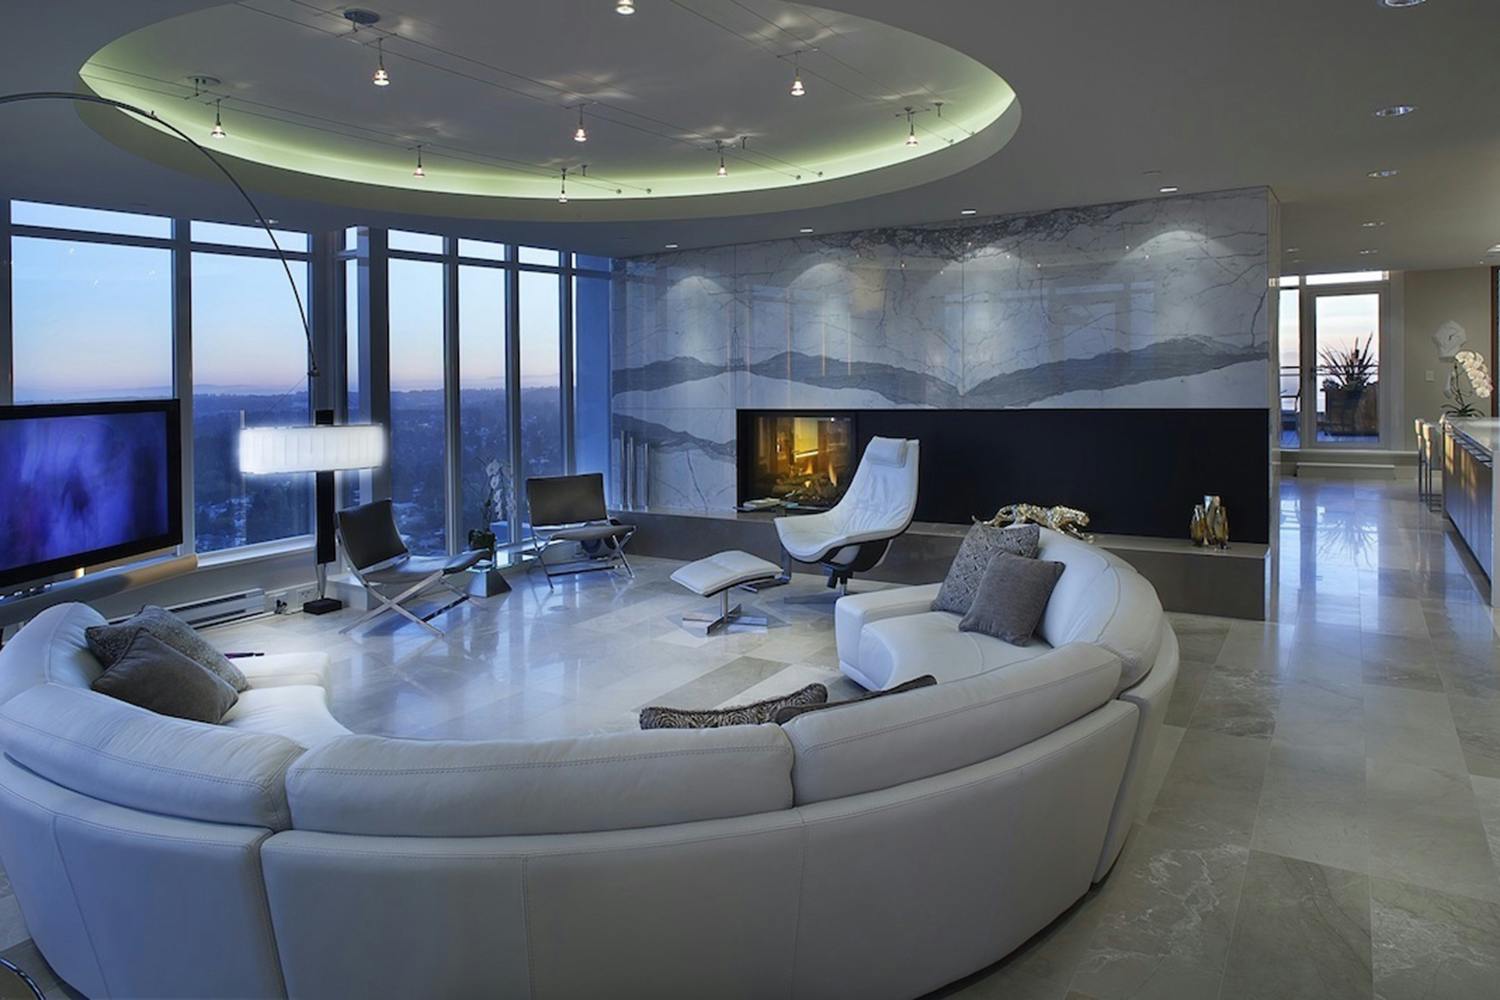 Penthouse Residence Surrey living room and fireplace at night